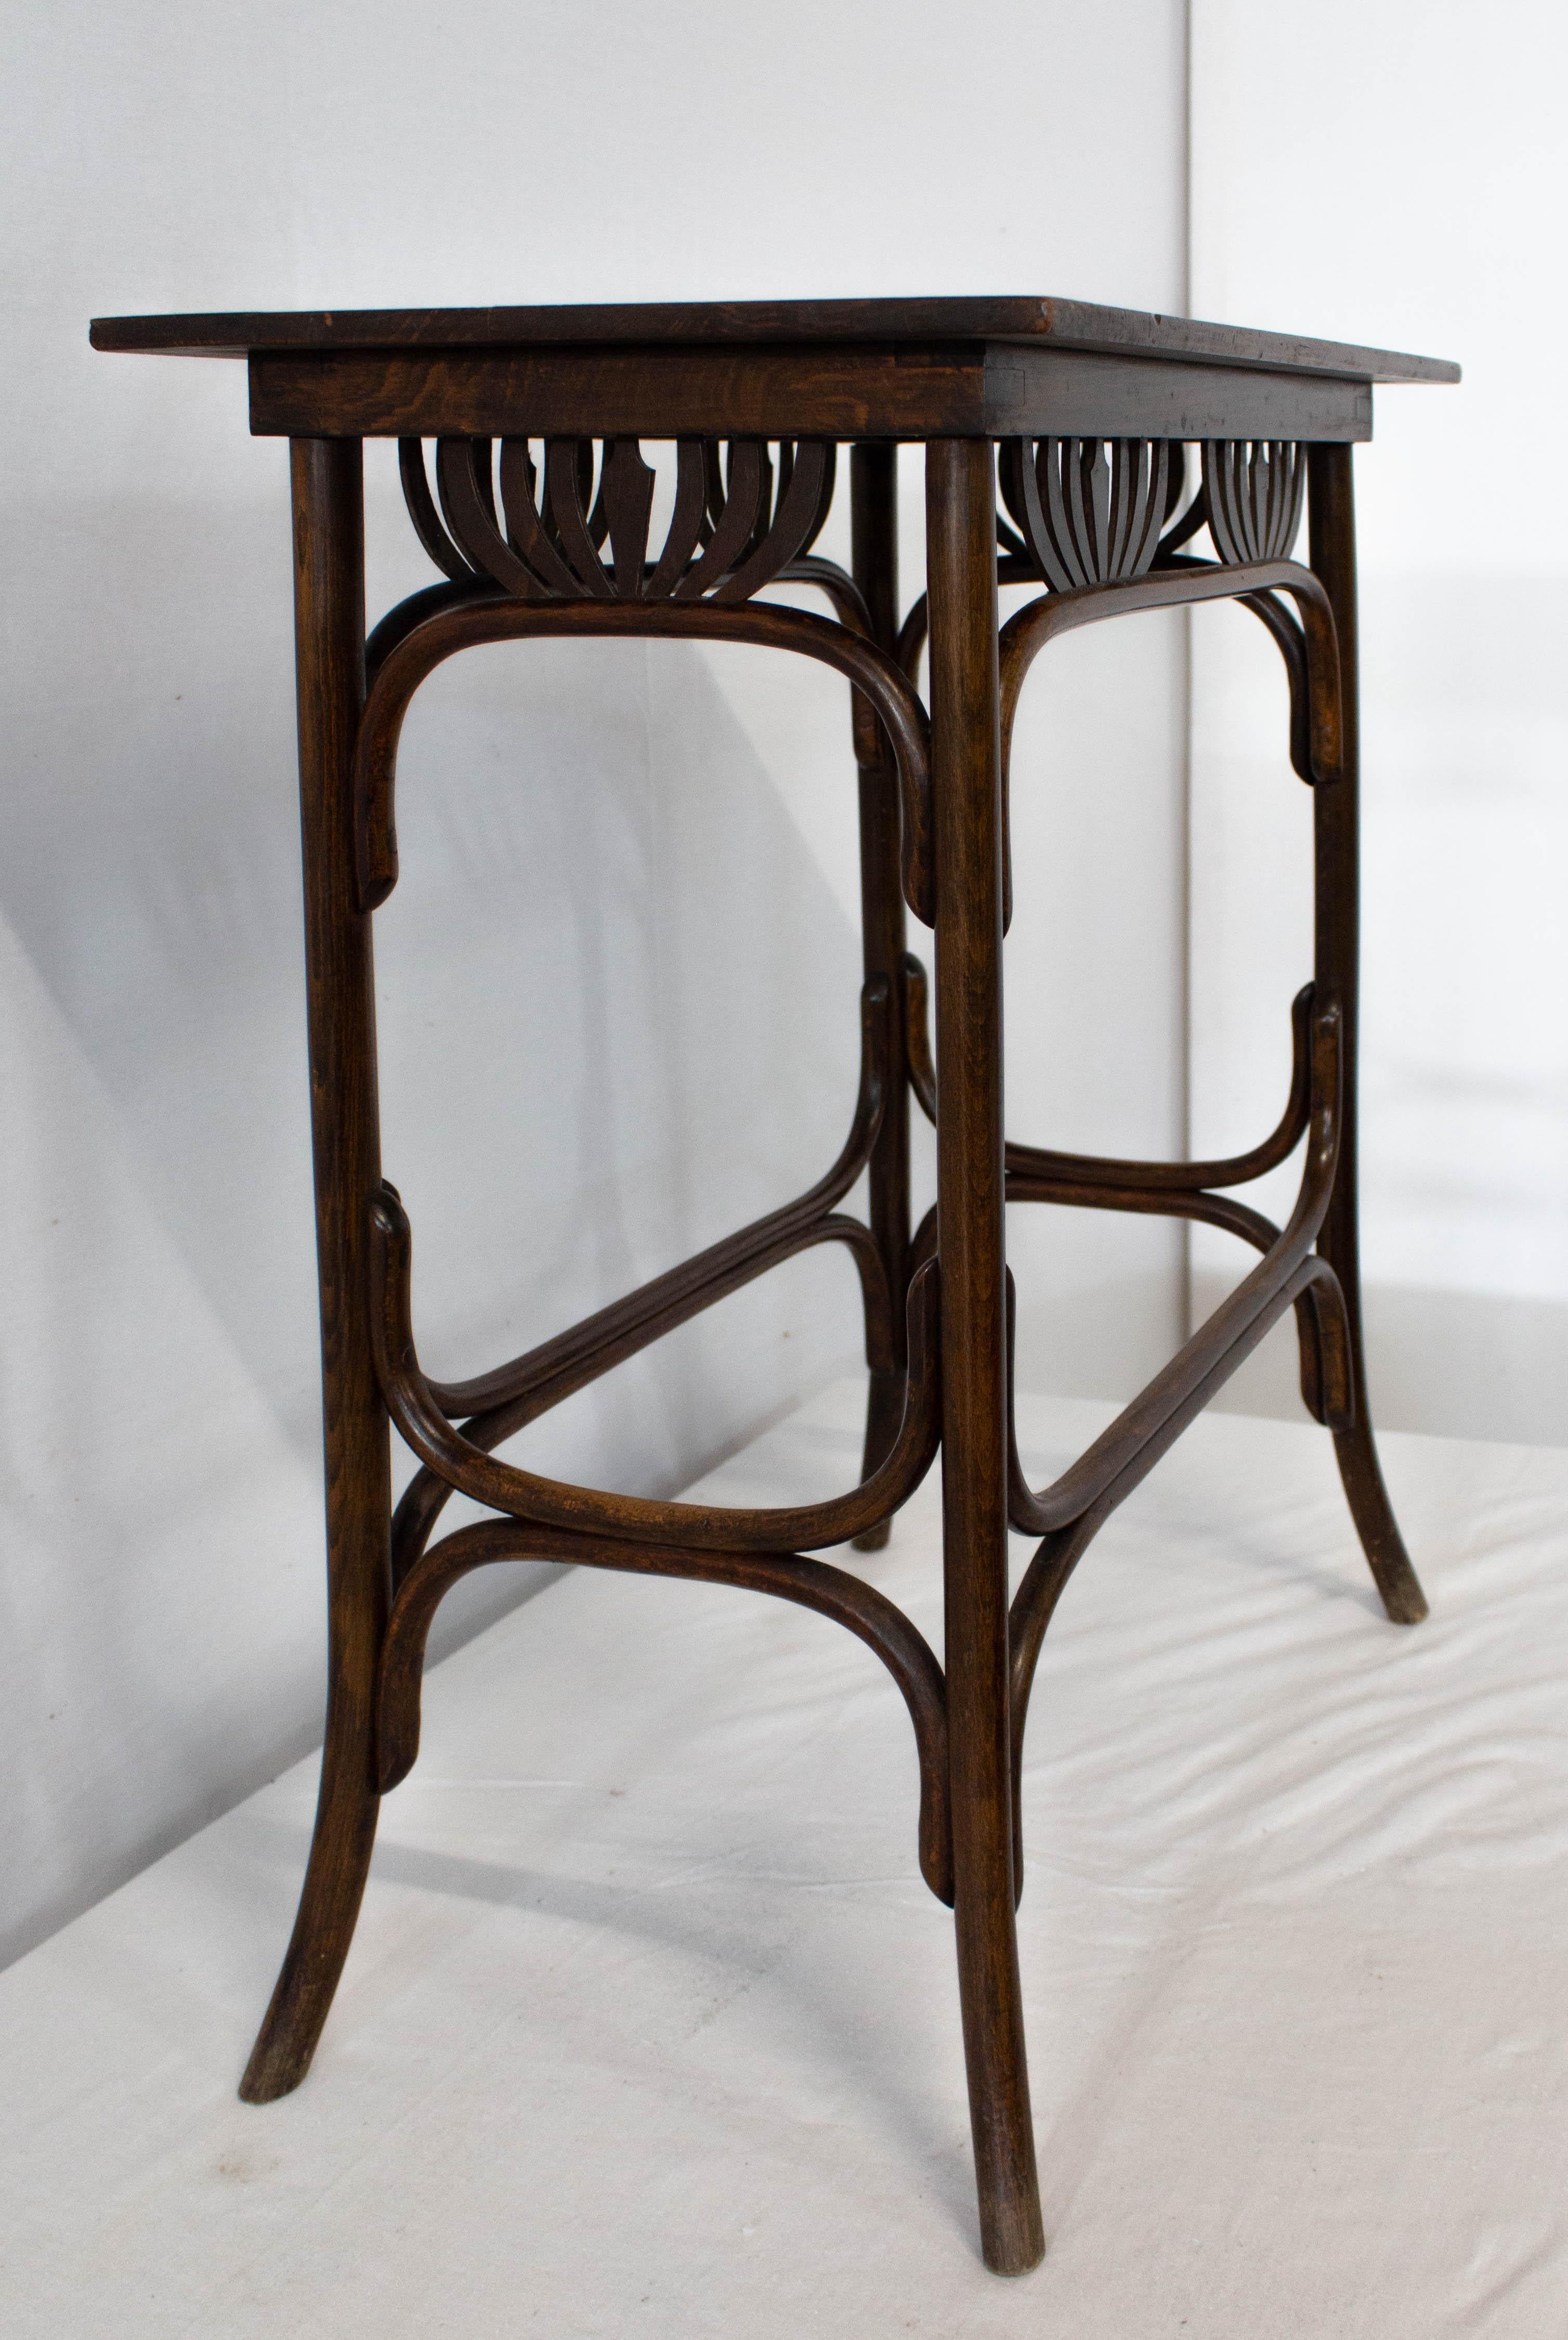 Side table Art Nouveau, Model Palmette from Fischel, circa 1910
Beech, solid wood
In good antique condition with minor signs of use for its age.

For shipping: 
W 58 x H70 x P 38, 5.6 kg.